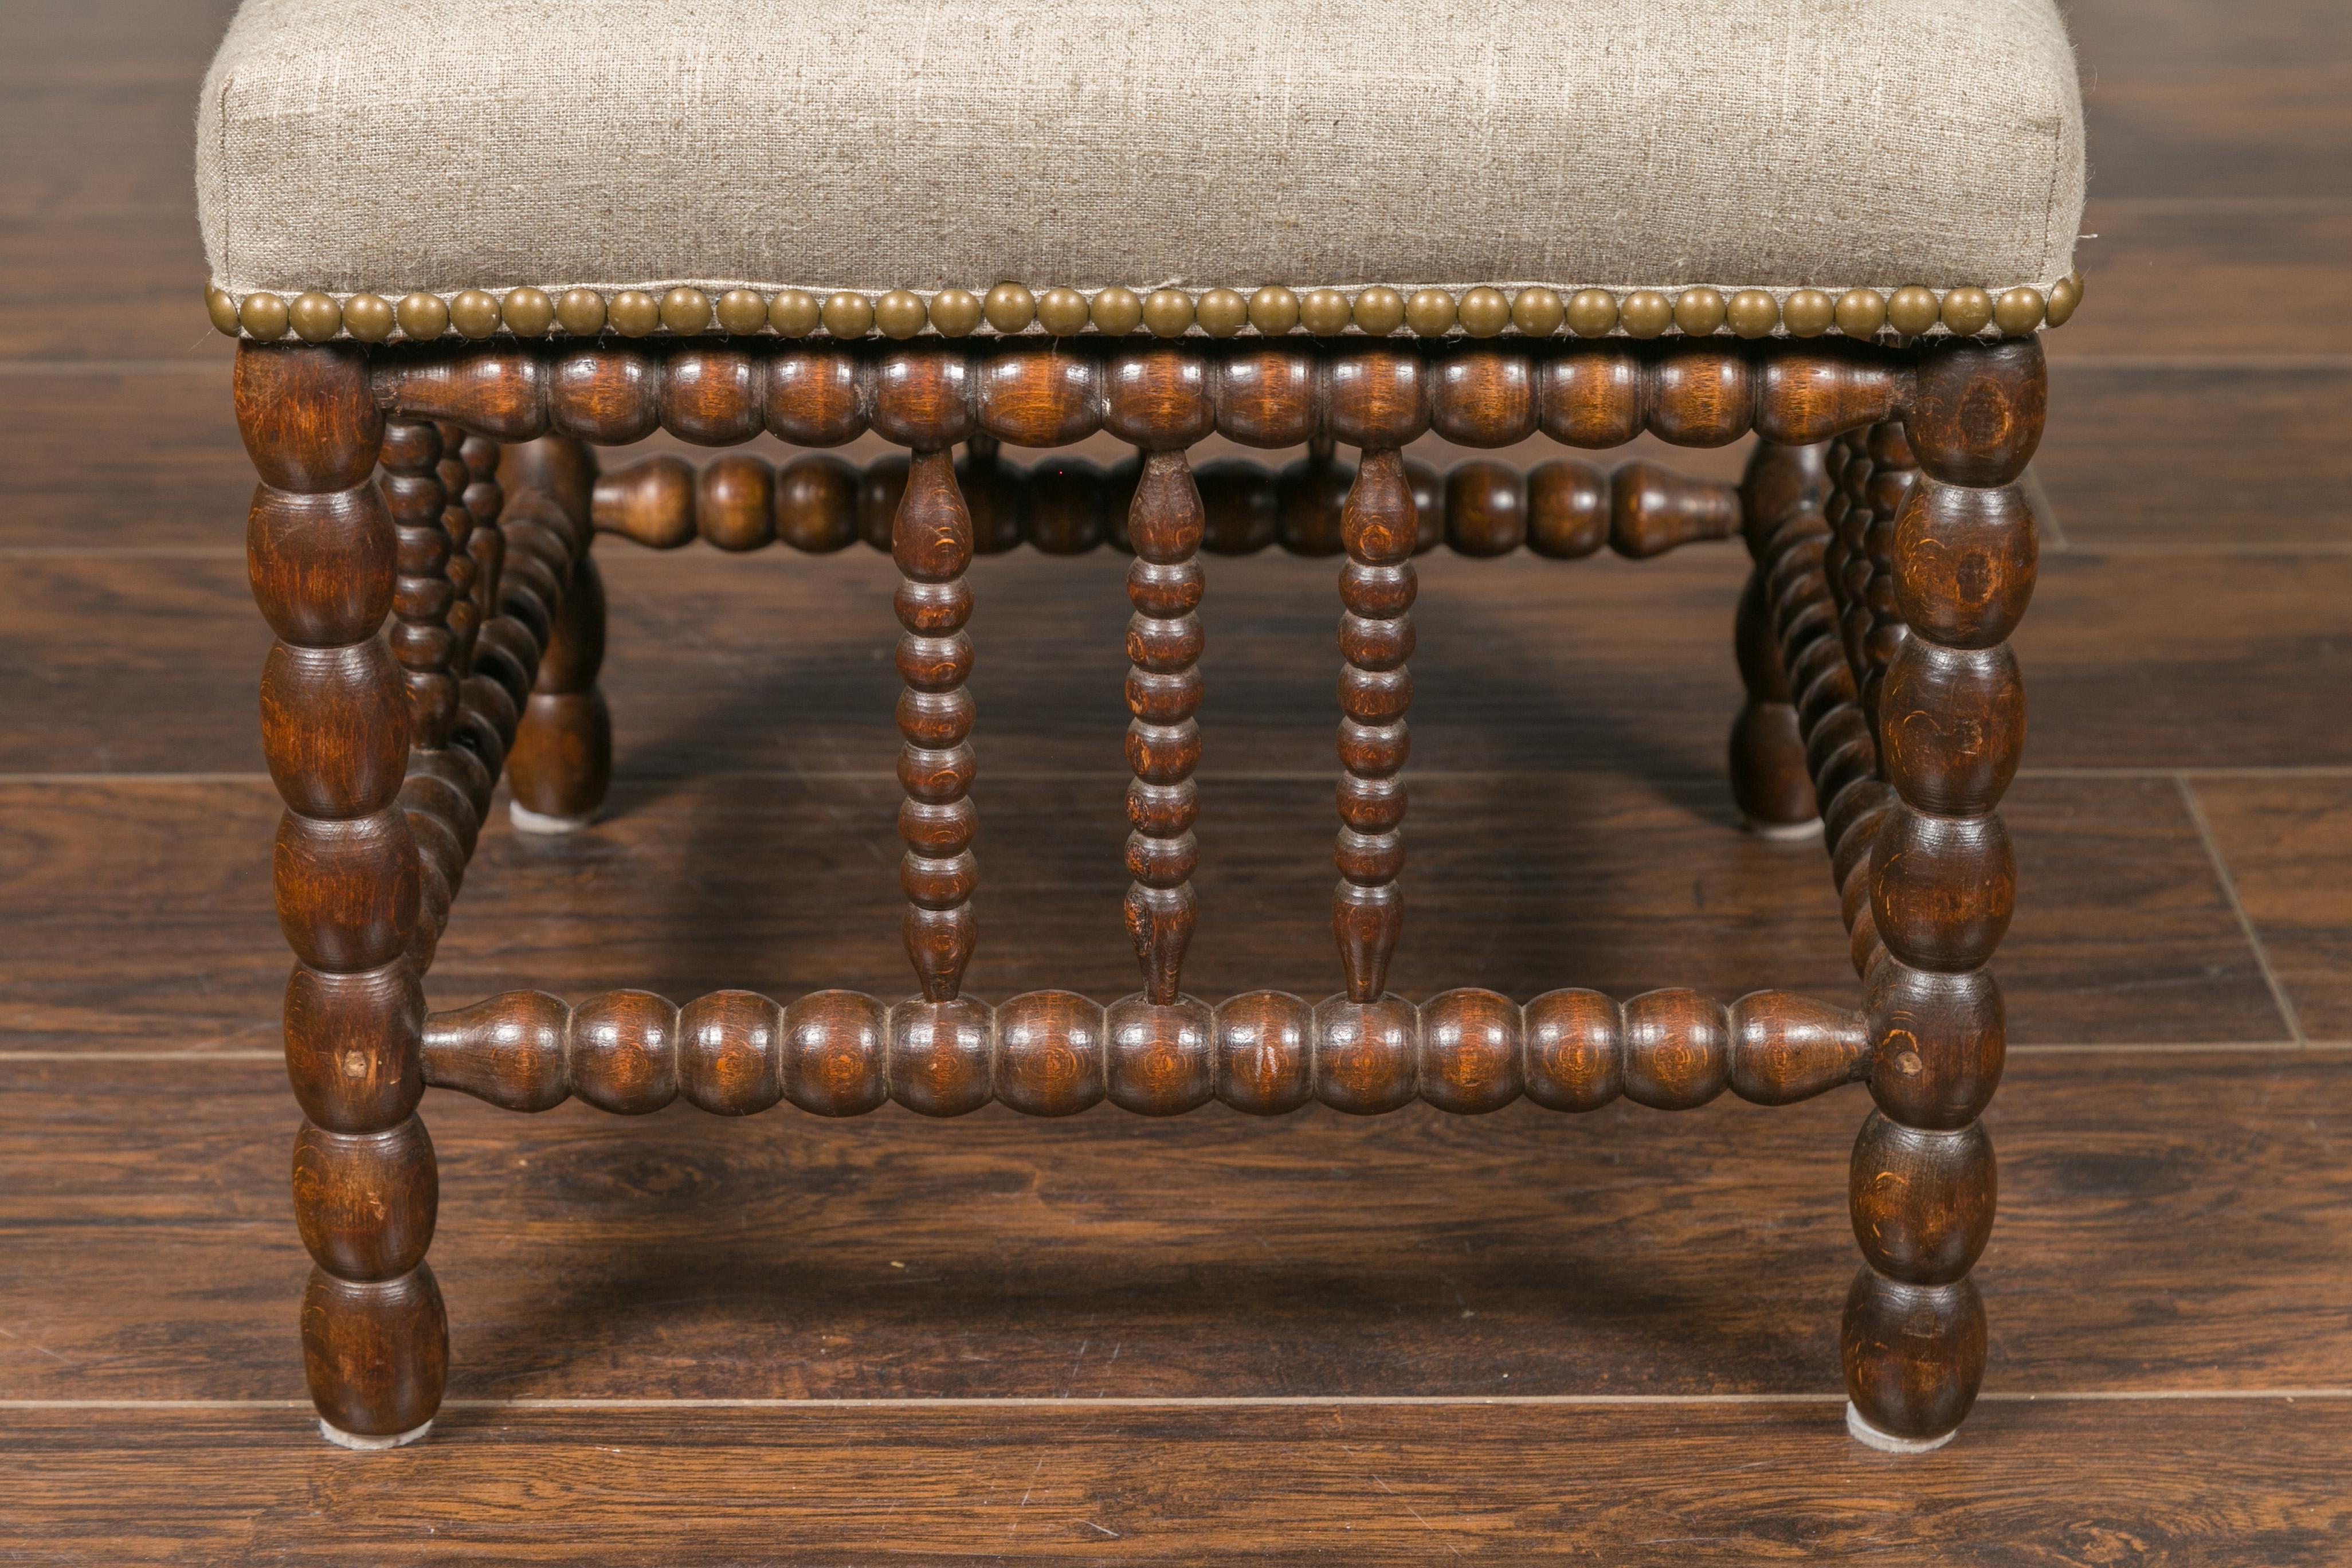 20th Century English 1900s Oak Footstool with Bobbin Legs, New Upholstery and Nailhead Trim